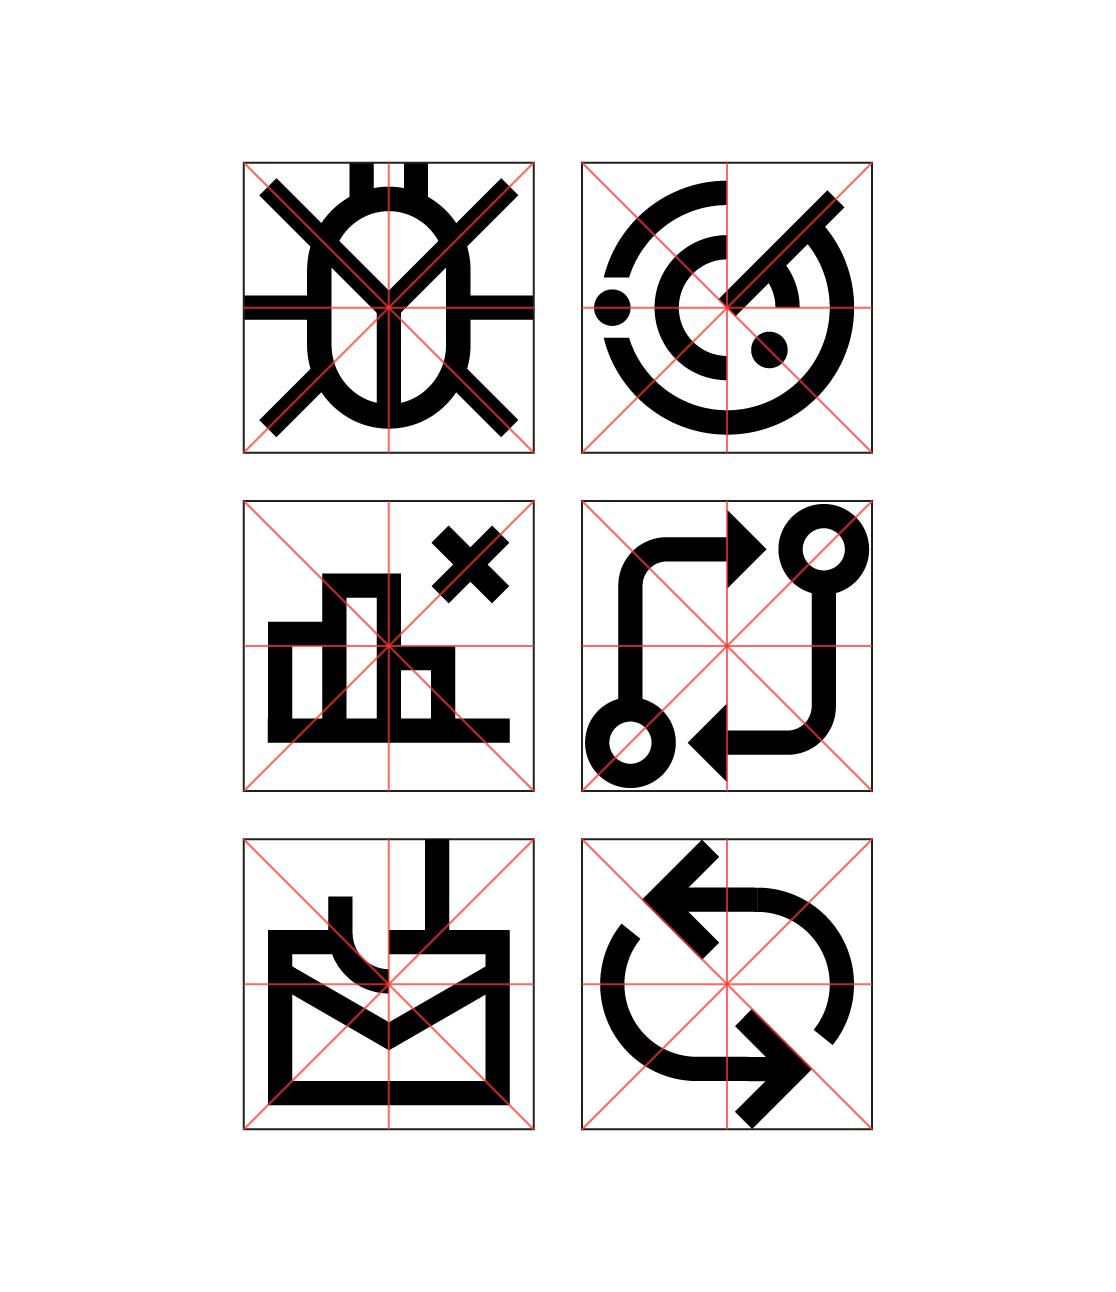 Icons are placed within the previously detailed grid and arranged in three rows of two to showcase icons that leverage the cardinal and orthogonal flowlines.